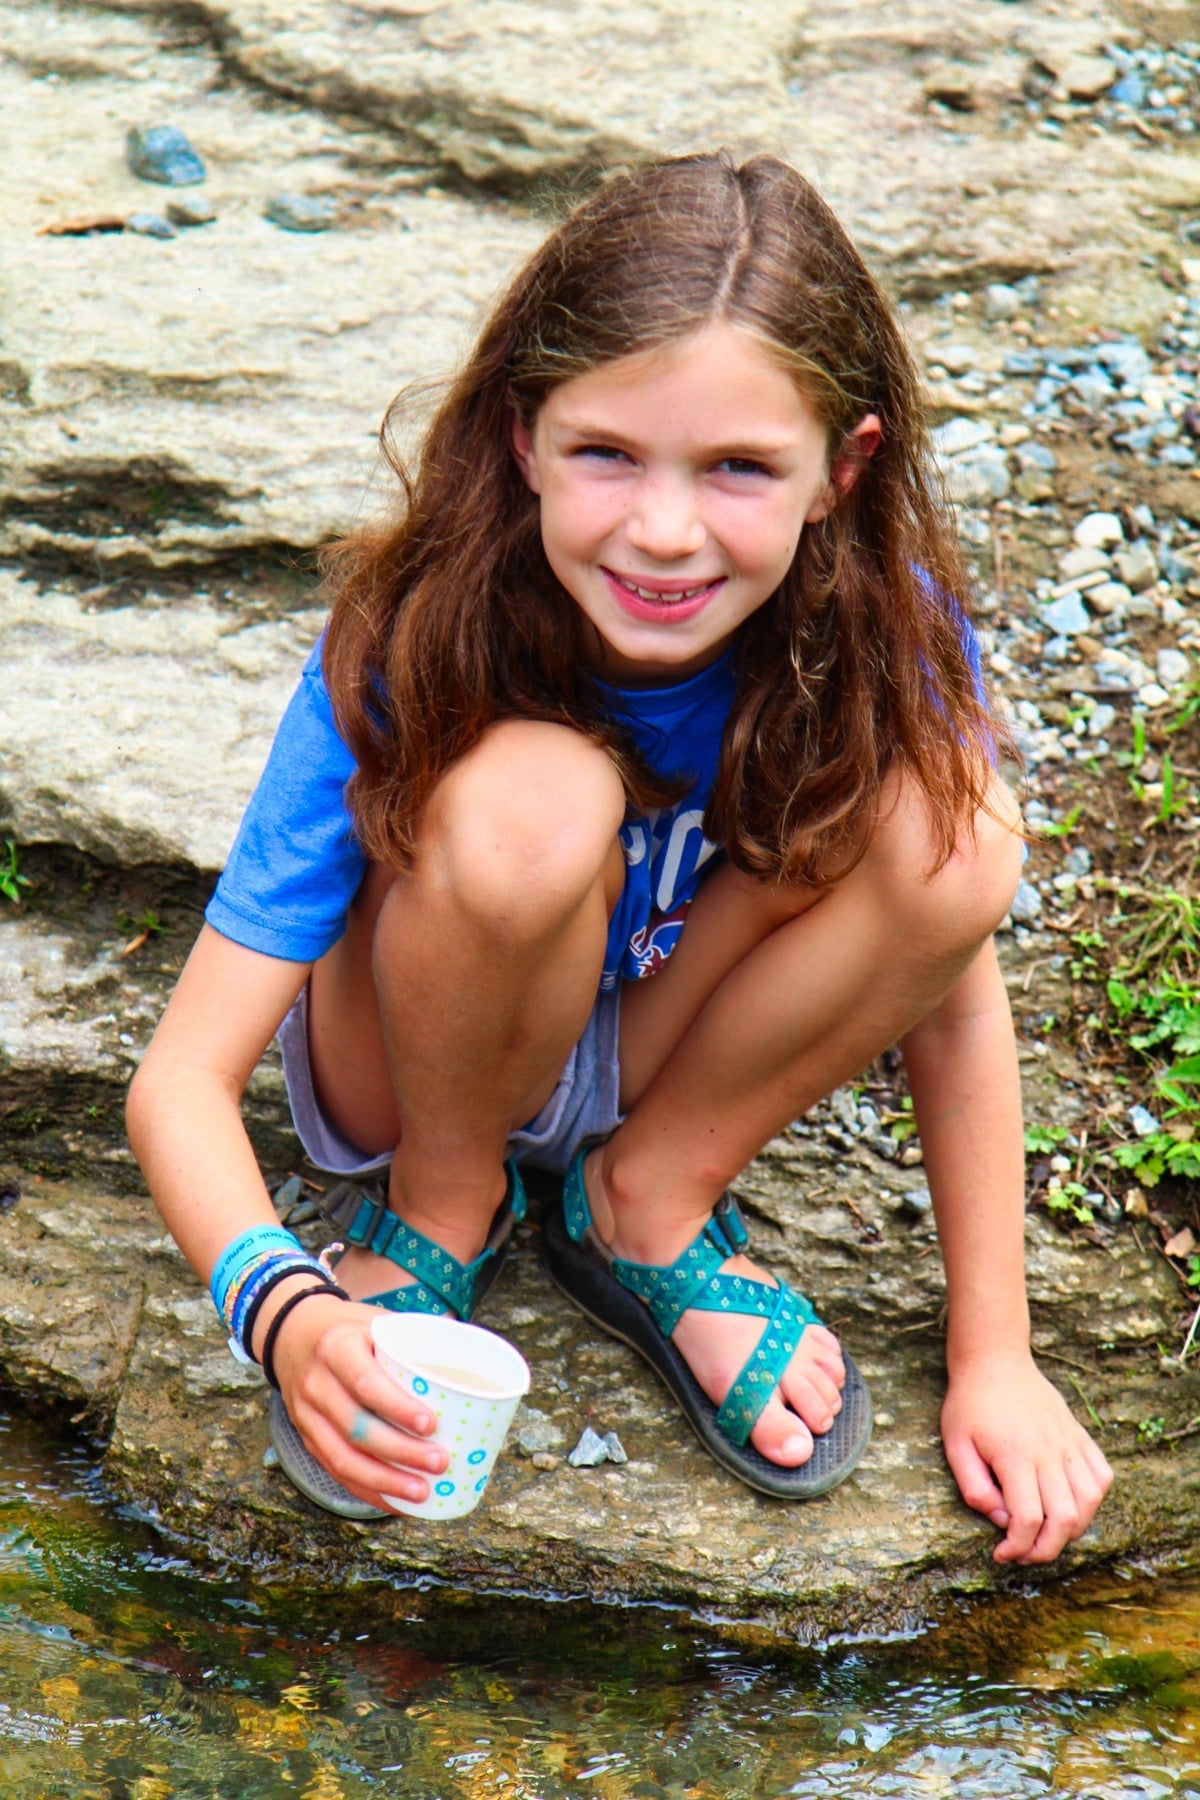 catching tadpoles at summer camp